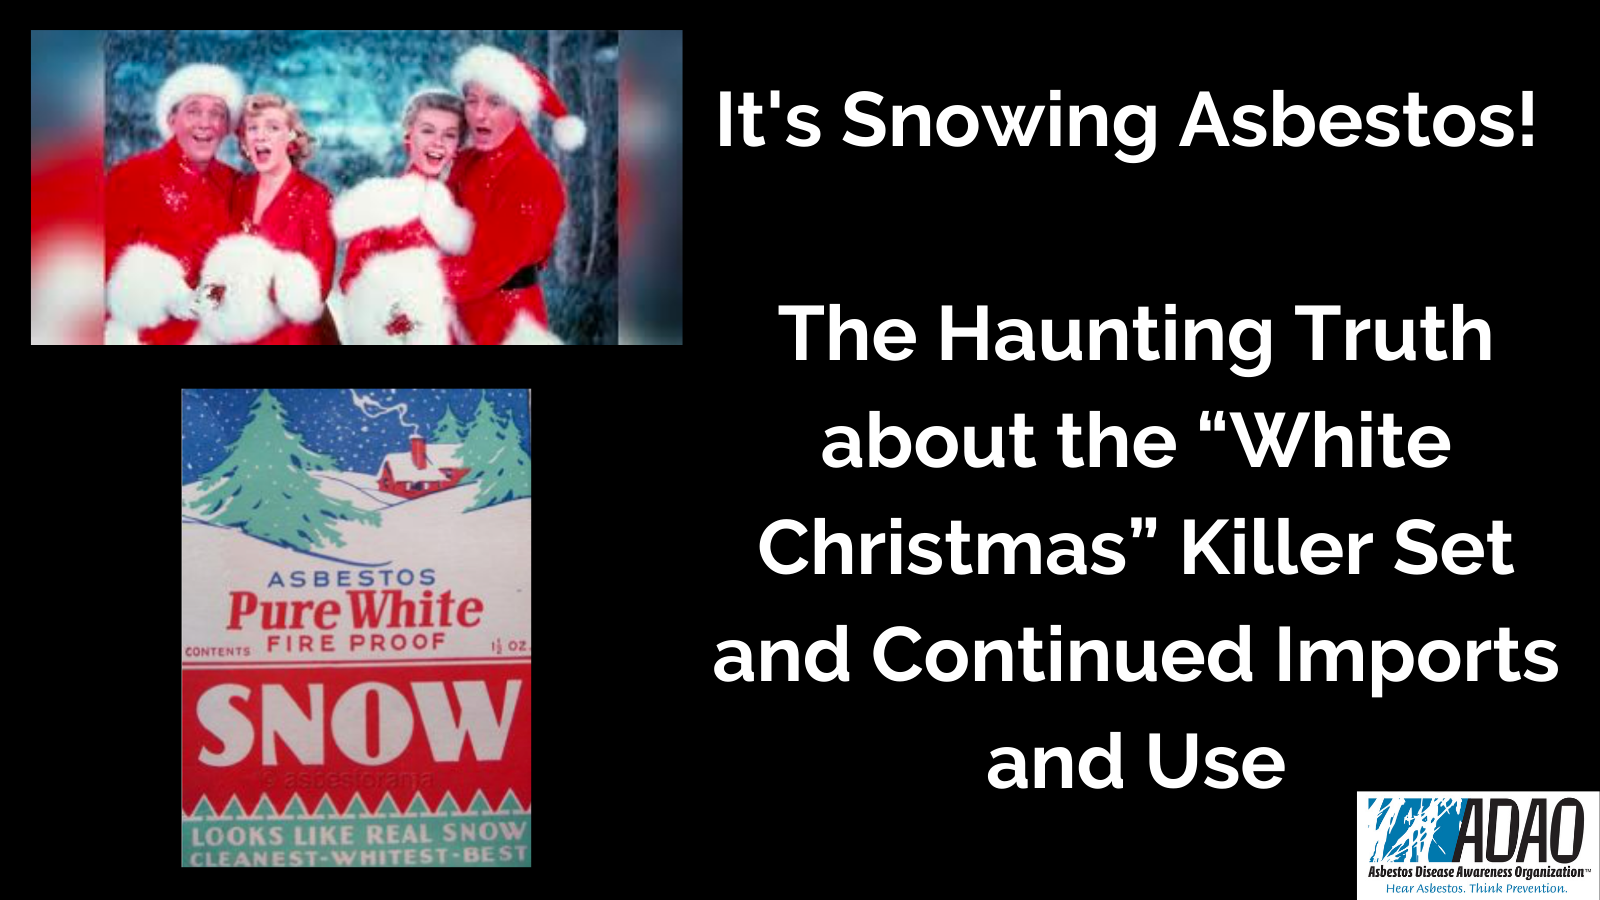 It's Snowing Asbestos! The Haunting Truth about the “White Christmas